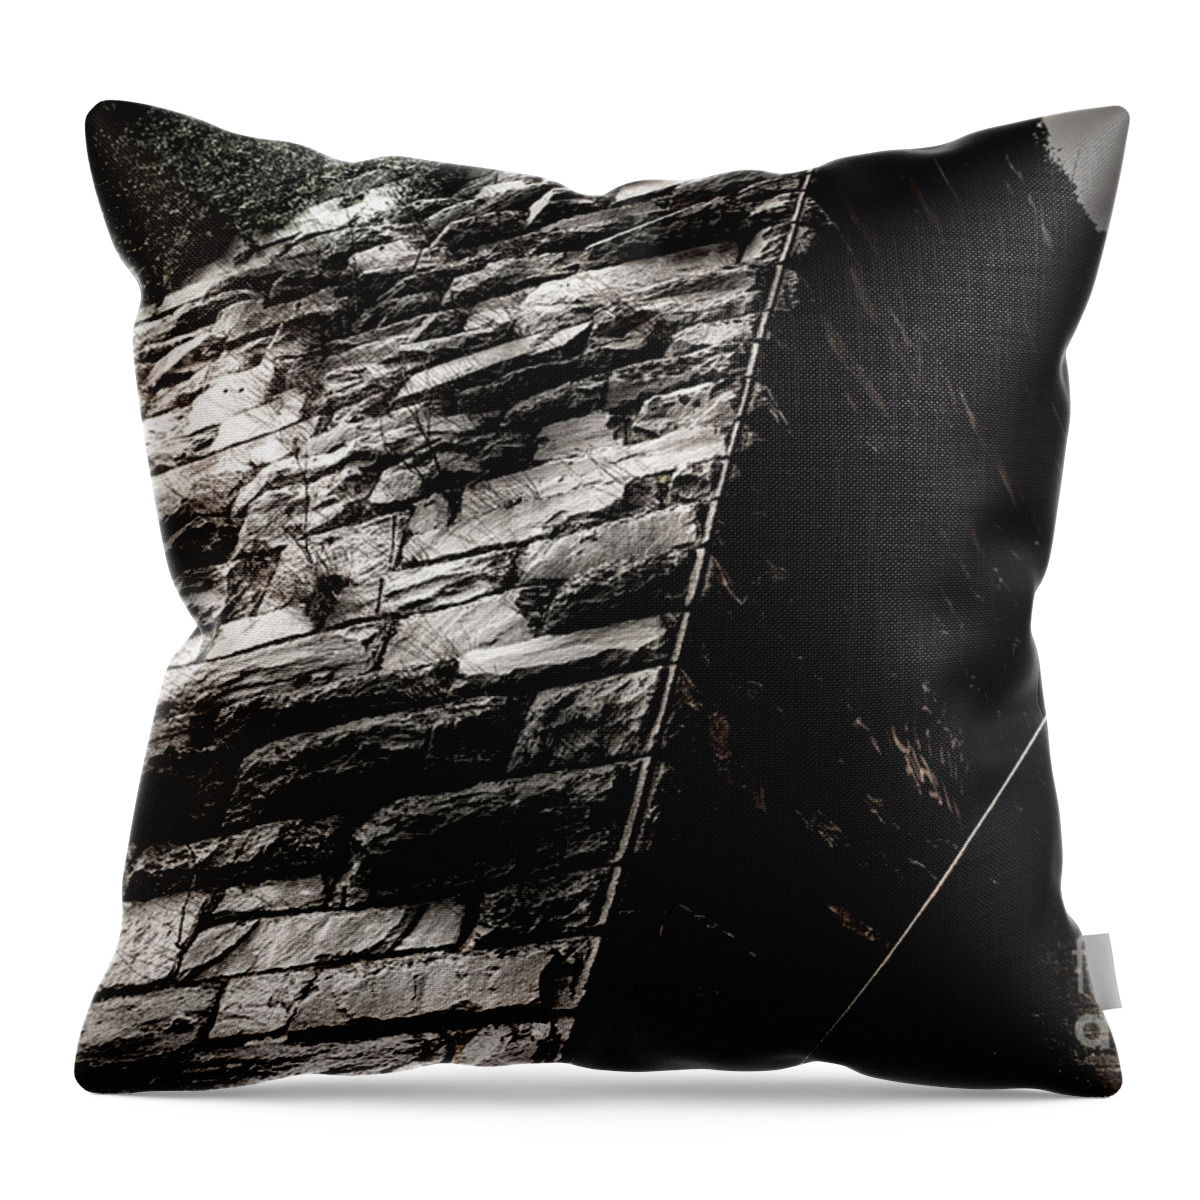 Exorcist Throw Pillow featuring the photograph Exorcist Steps by Jonas Luis